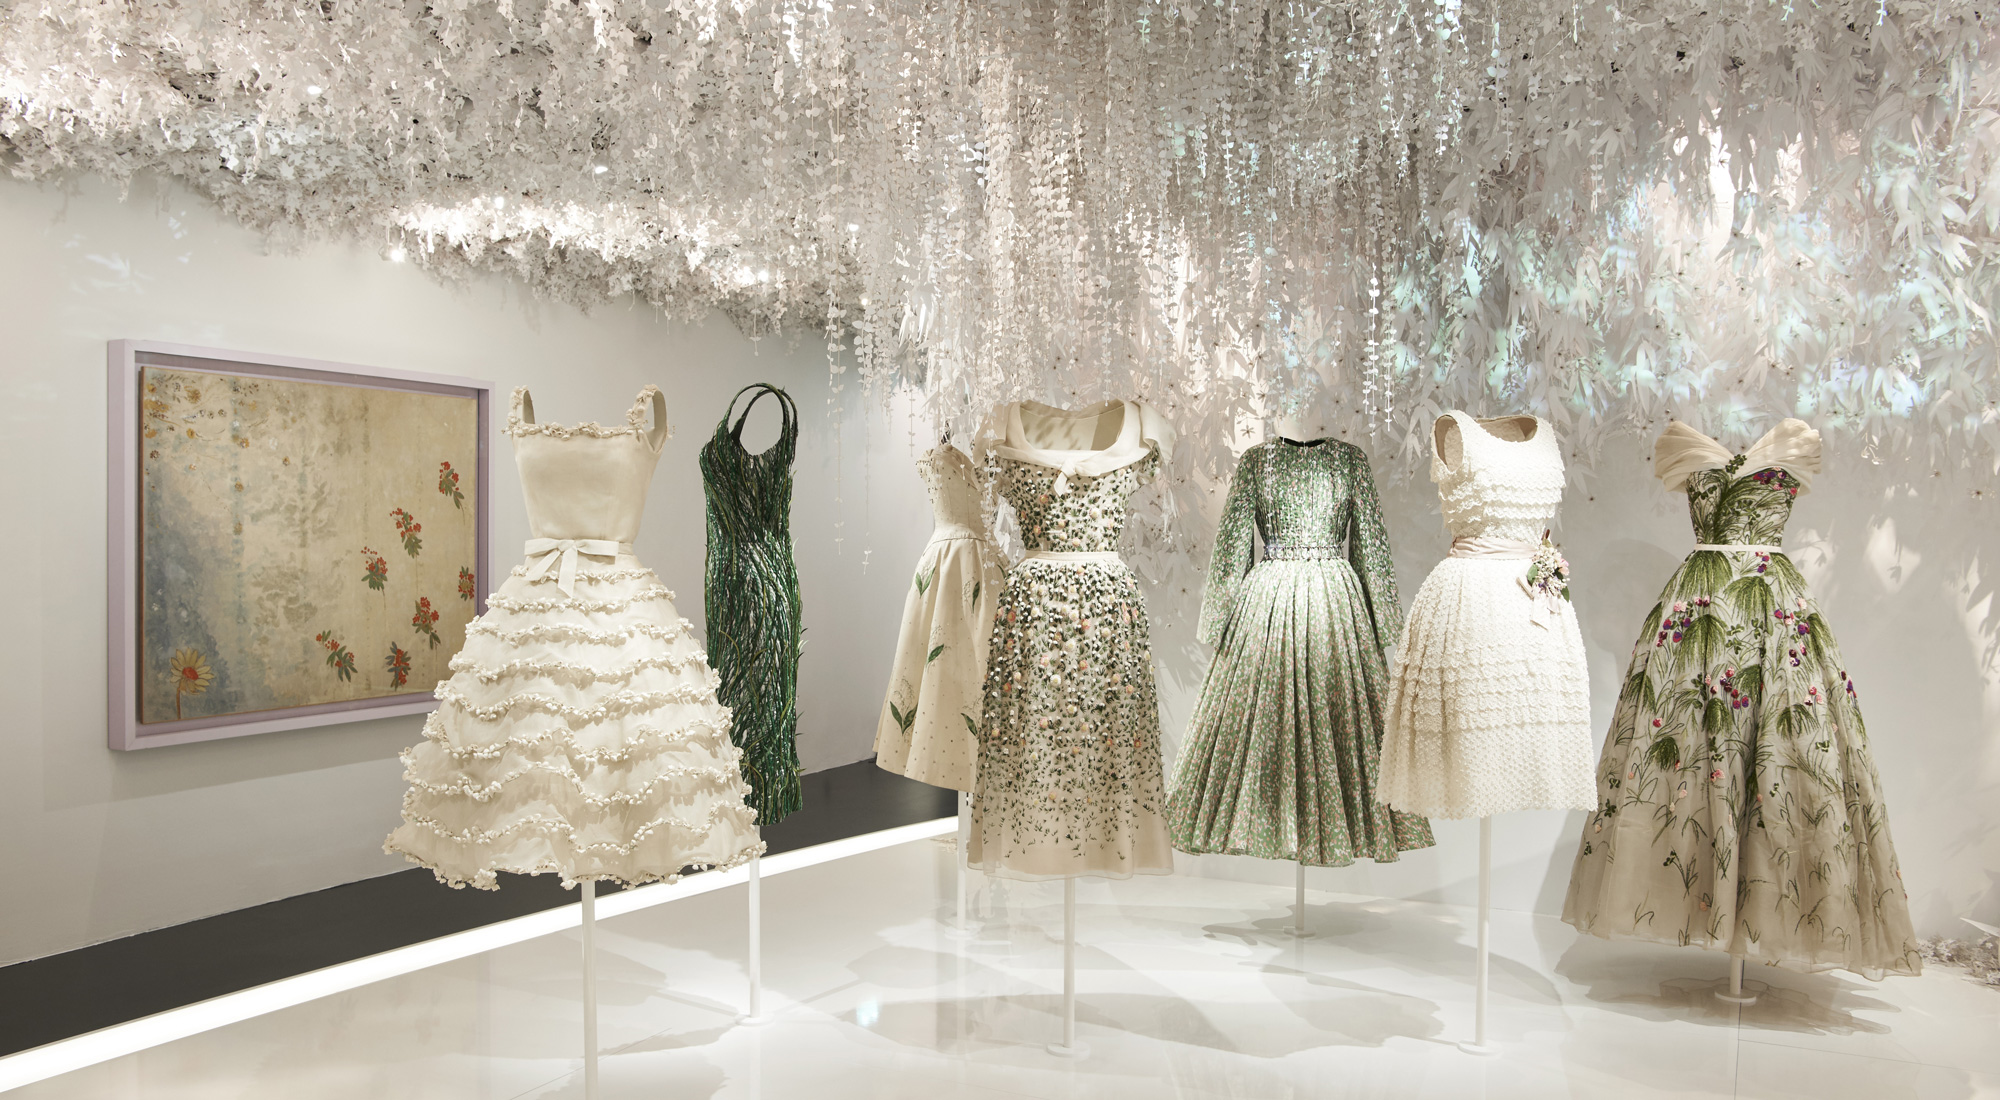 The Scenography of the 'Christian Dior: Designer of Dreams